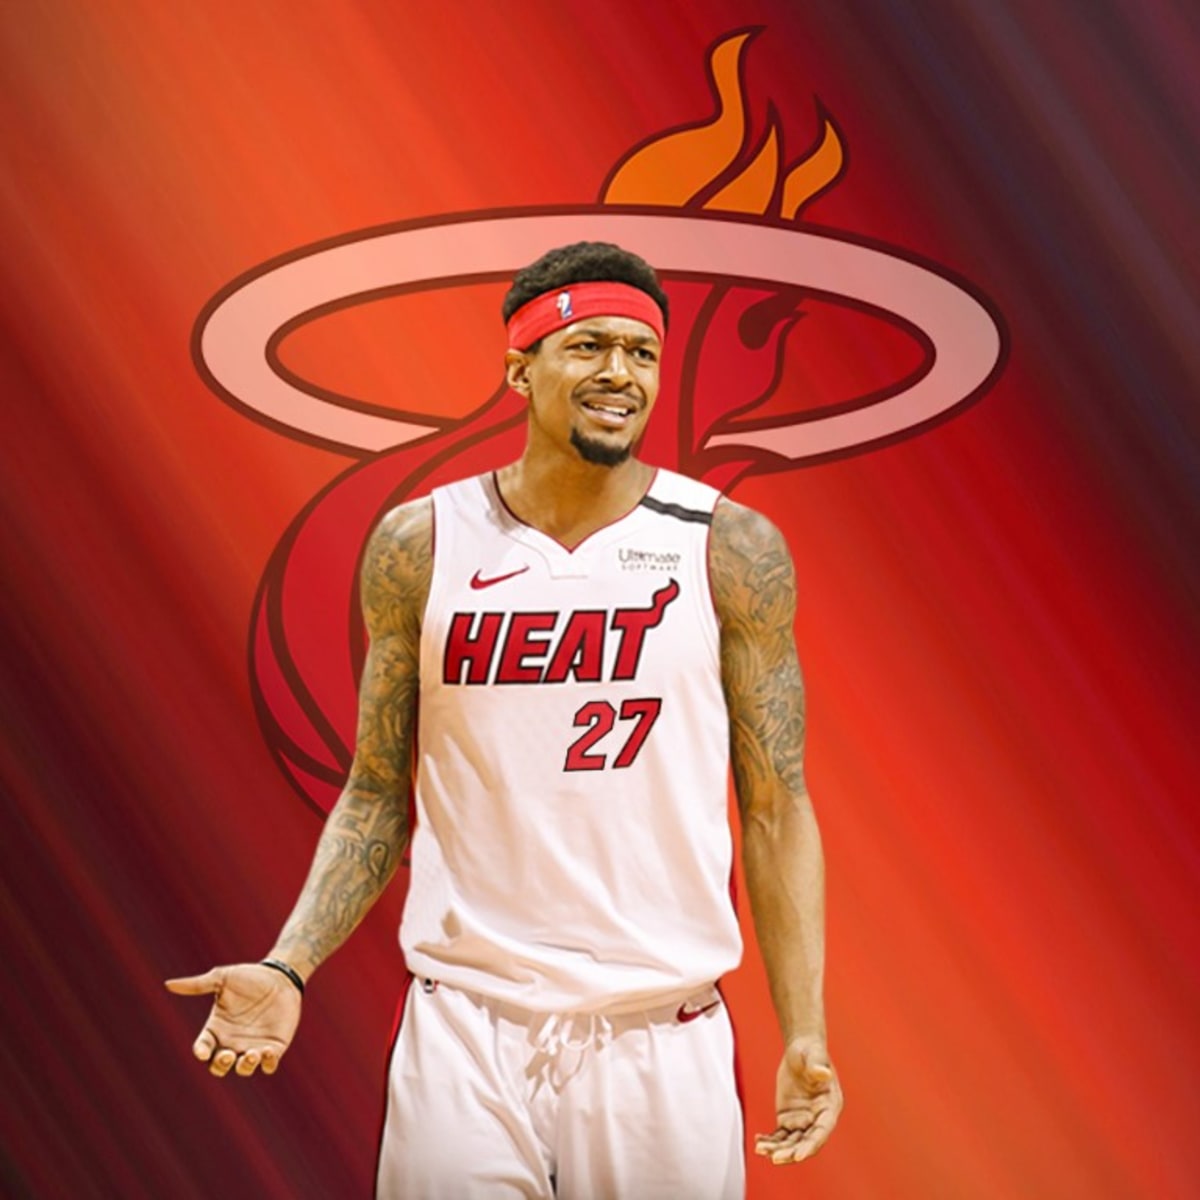 Miami Heat Could Reportedly Make Blockbuster Bradley Beal Trade